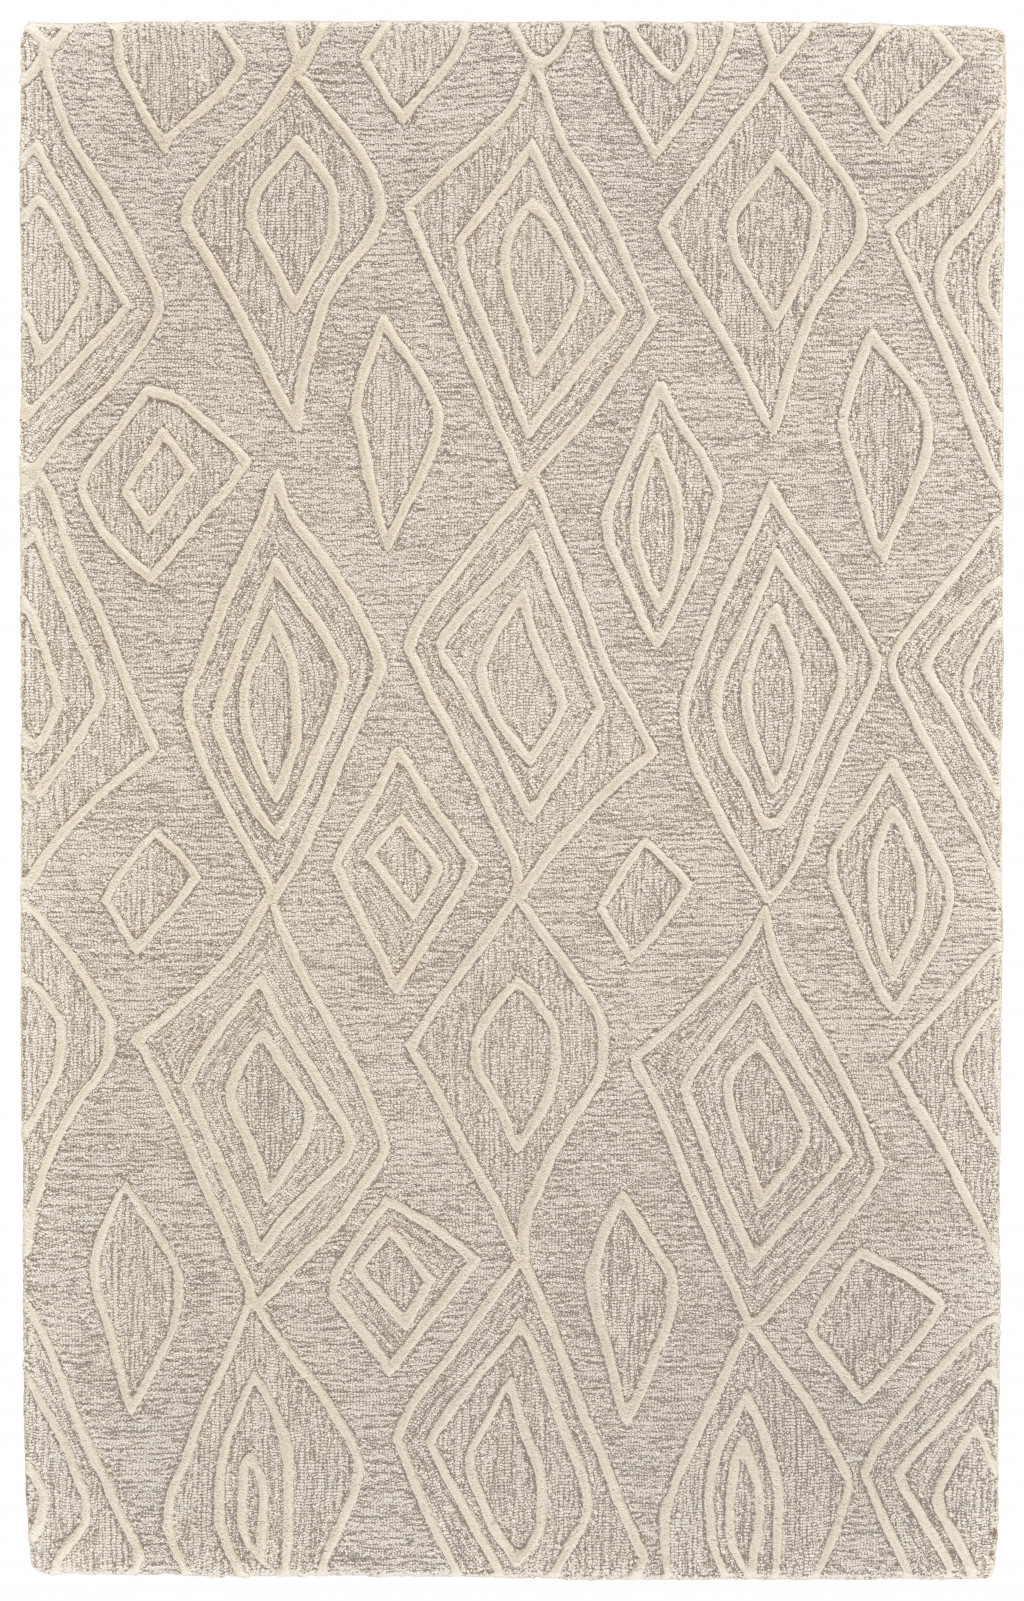 2' X 3' Tan And Ivory Wool Geometric Tufted Handmade Stain Resistant Area Rug-511873-1